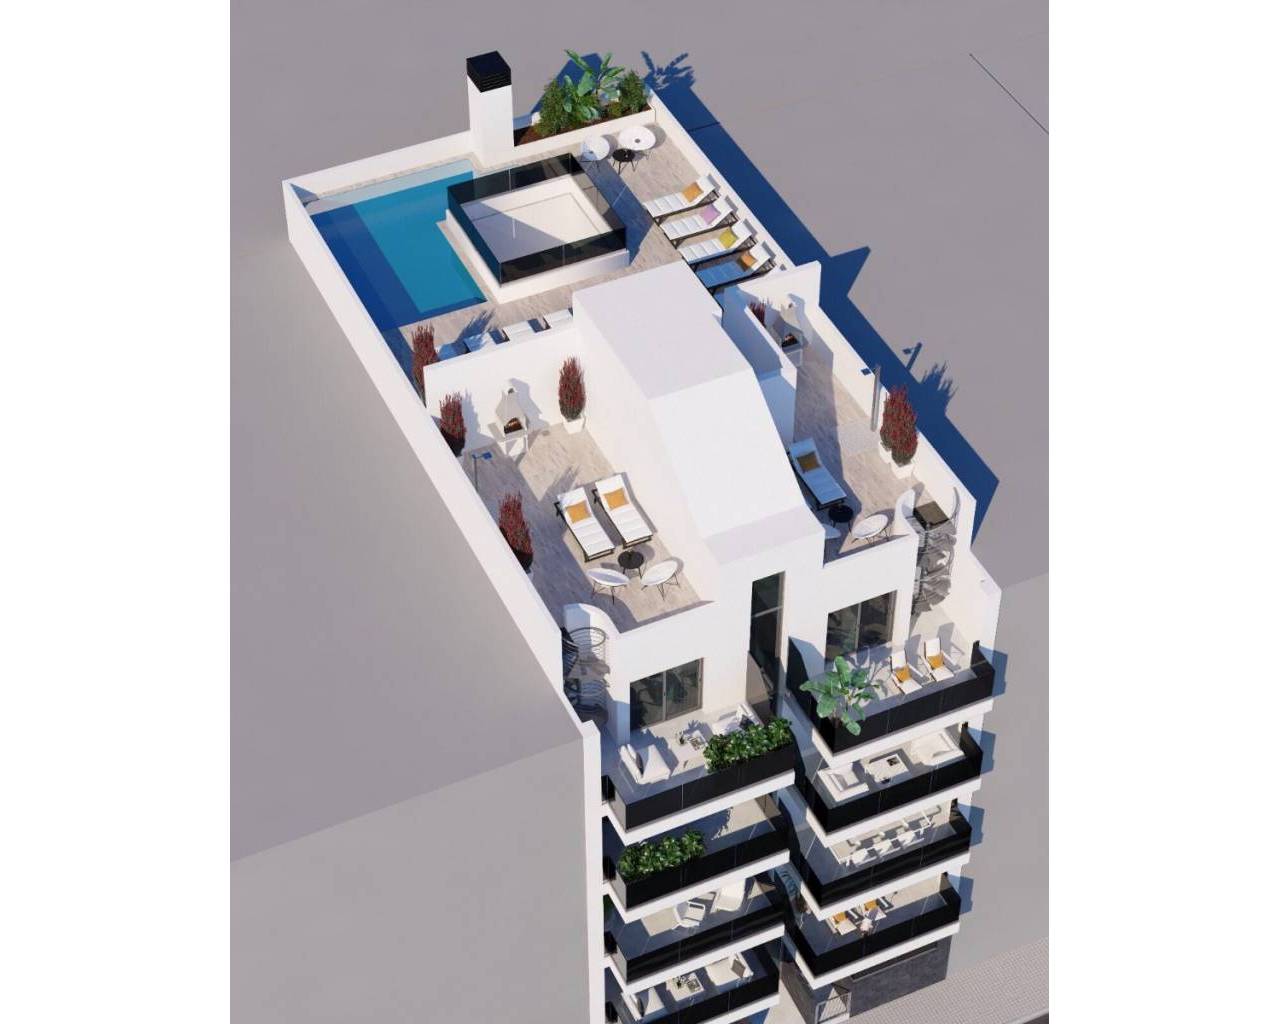 New Build - Apartment - Torrevieja - Torrevieja Town Centre